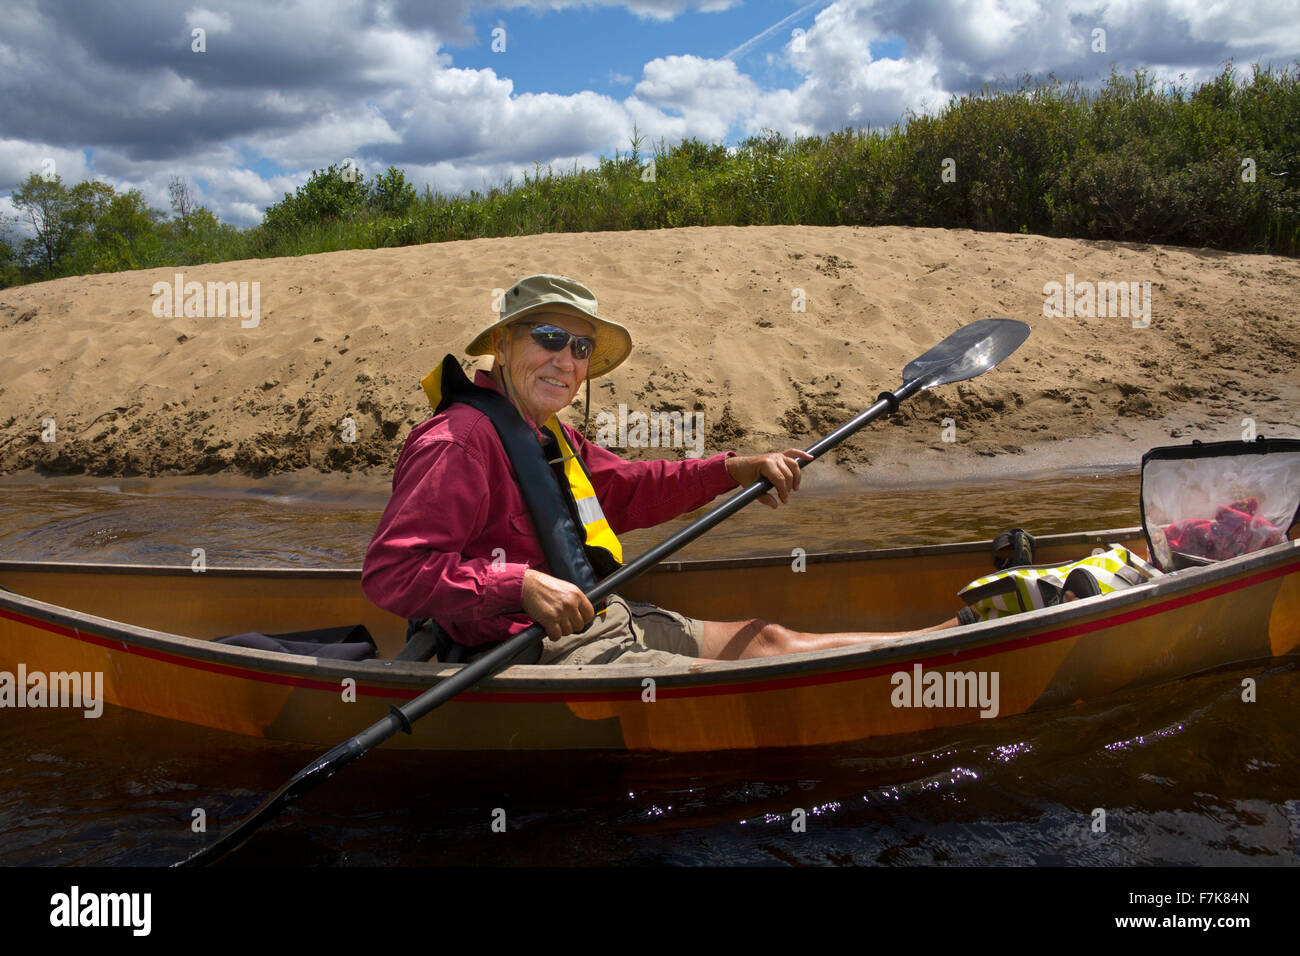 Senior man paddling a small canoe on Limekiln Lake in Old Forge, New York, with a kayak paddle. A sandy beach is in back. Stock Photo